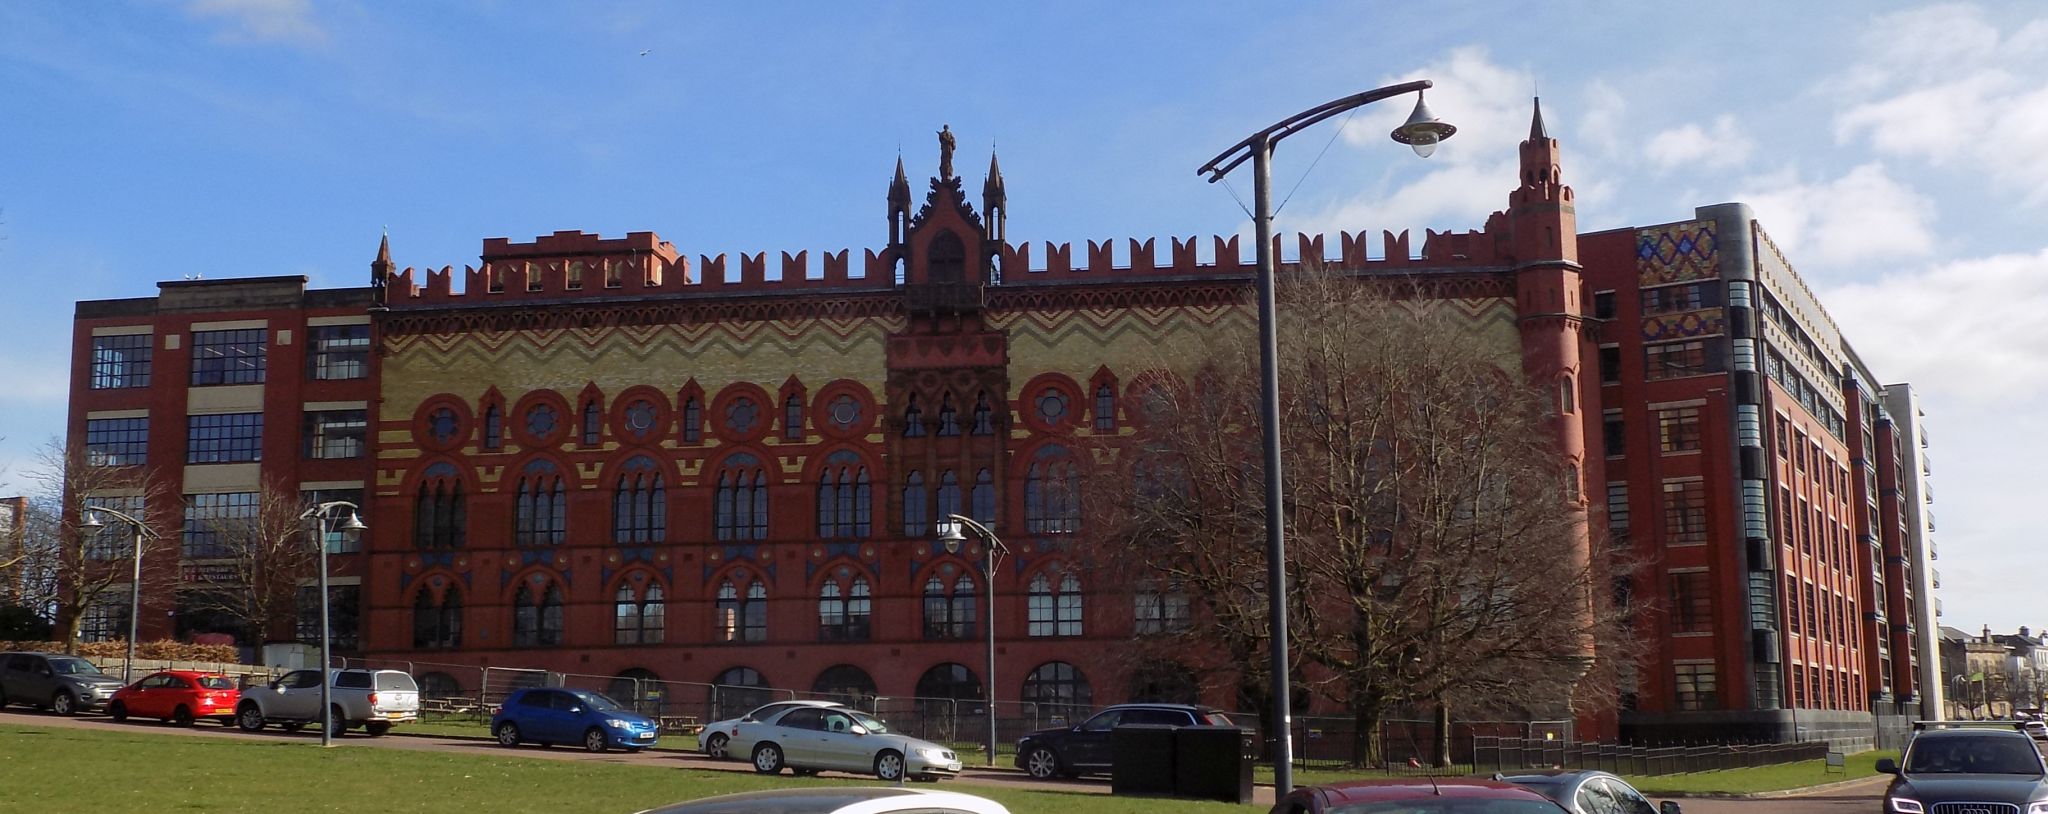 Ornate facade of Templeton's Carpet Factory from Glasgow Green